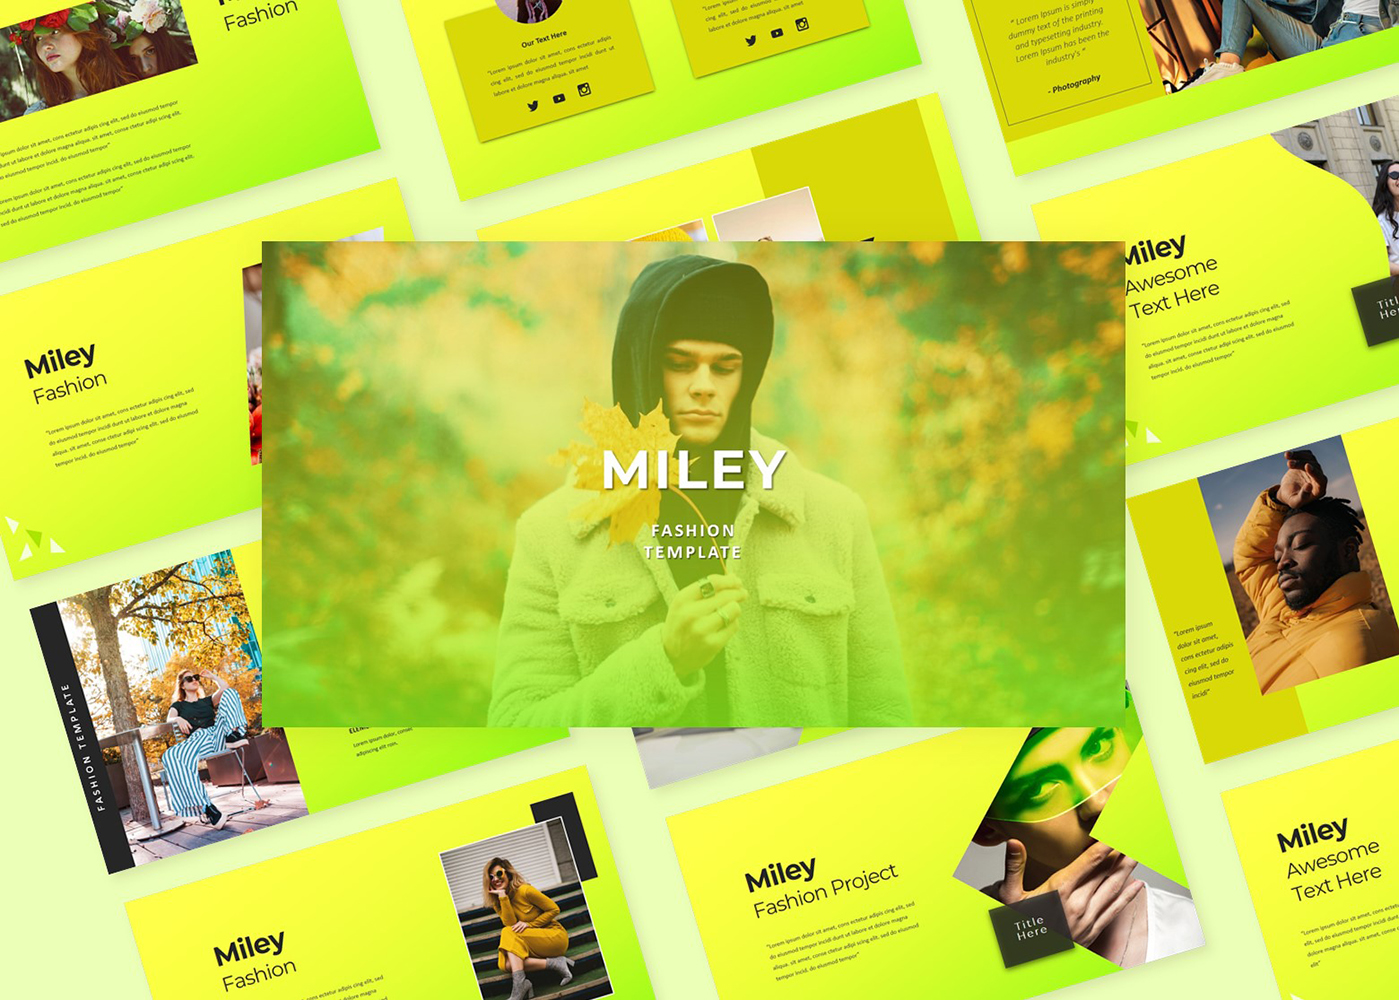 Miley Fashion PowerPoint Template